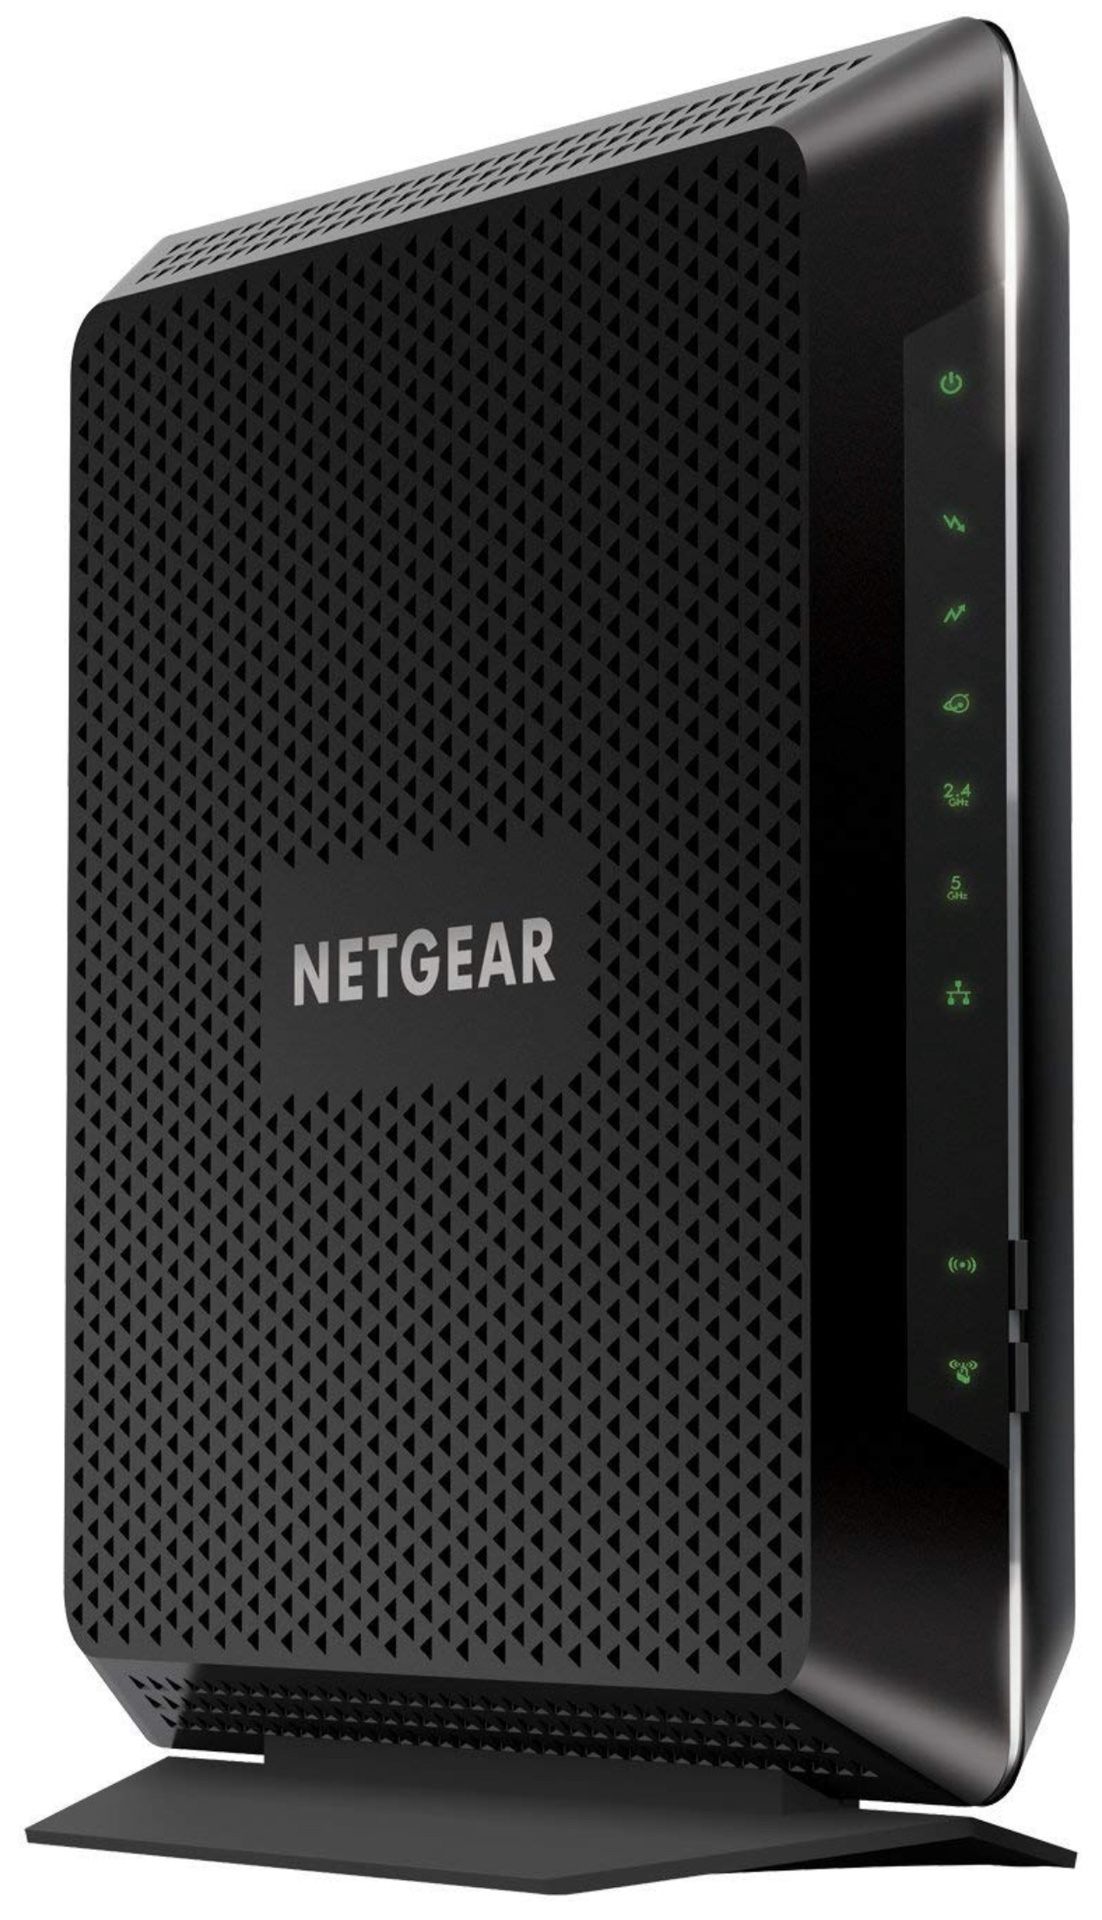 NETGEAR Nighthawk Cable Modem WiFi Router Combo C7000. Compatible with all Cable Providers including Xfinity by Comcast, Spectrum, Cox | AC1900 WiFi